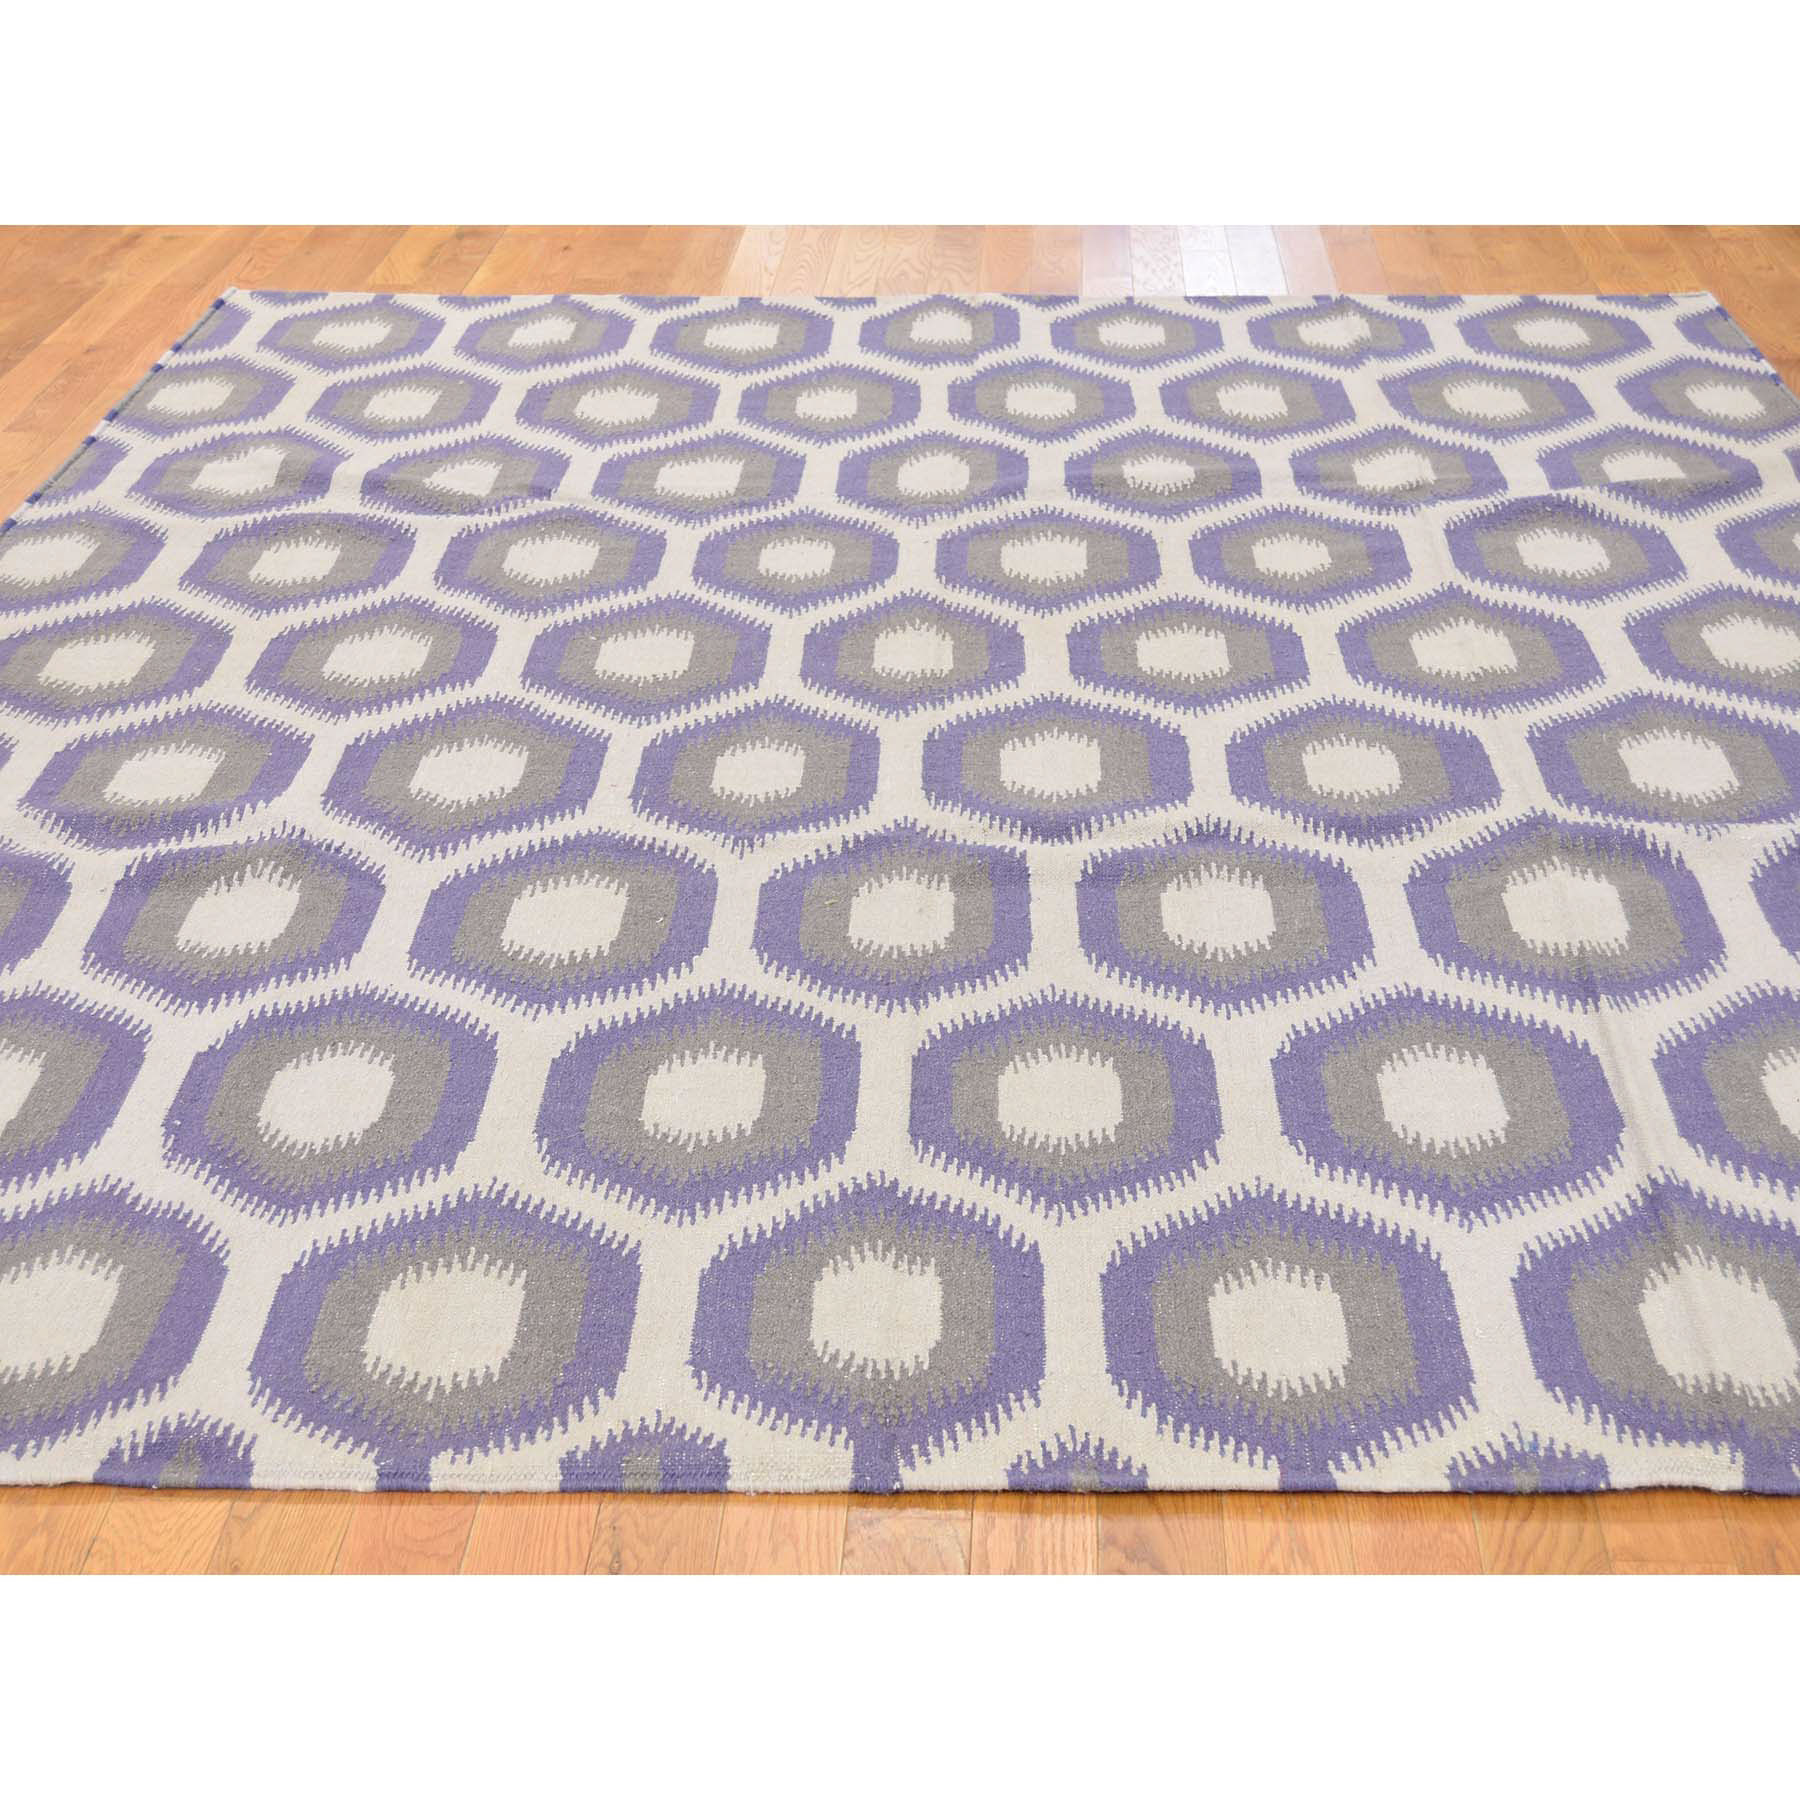 8'10''x12'2'' Durie Kilim Flat Weave Hand Woven Reversible Pure Wool Rug 